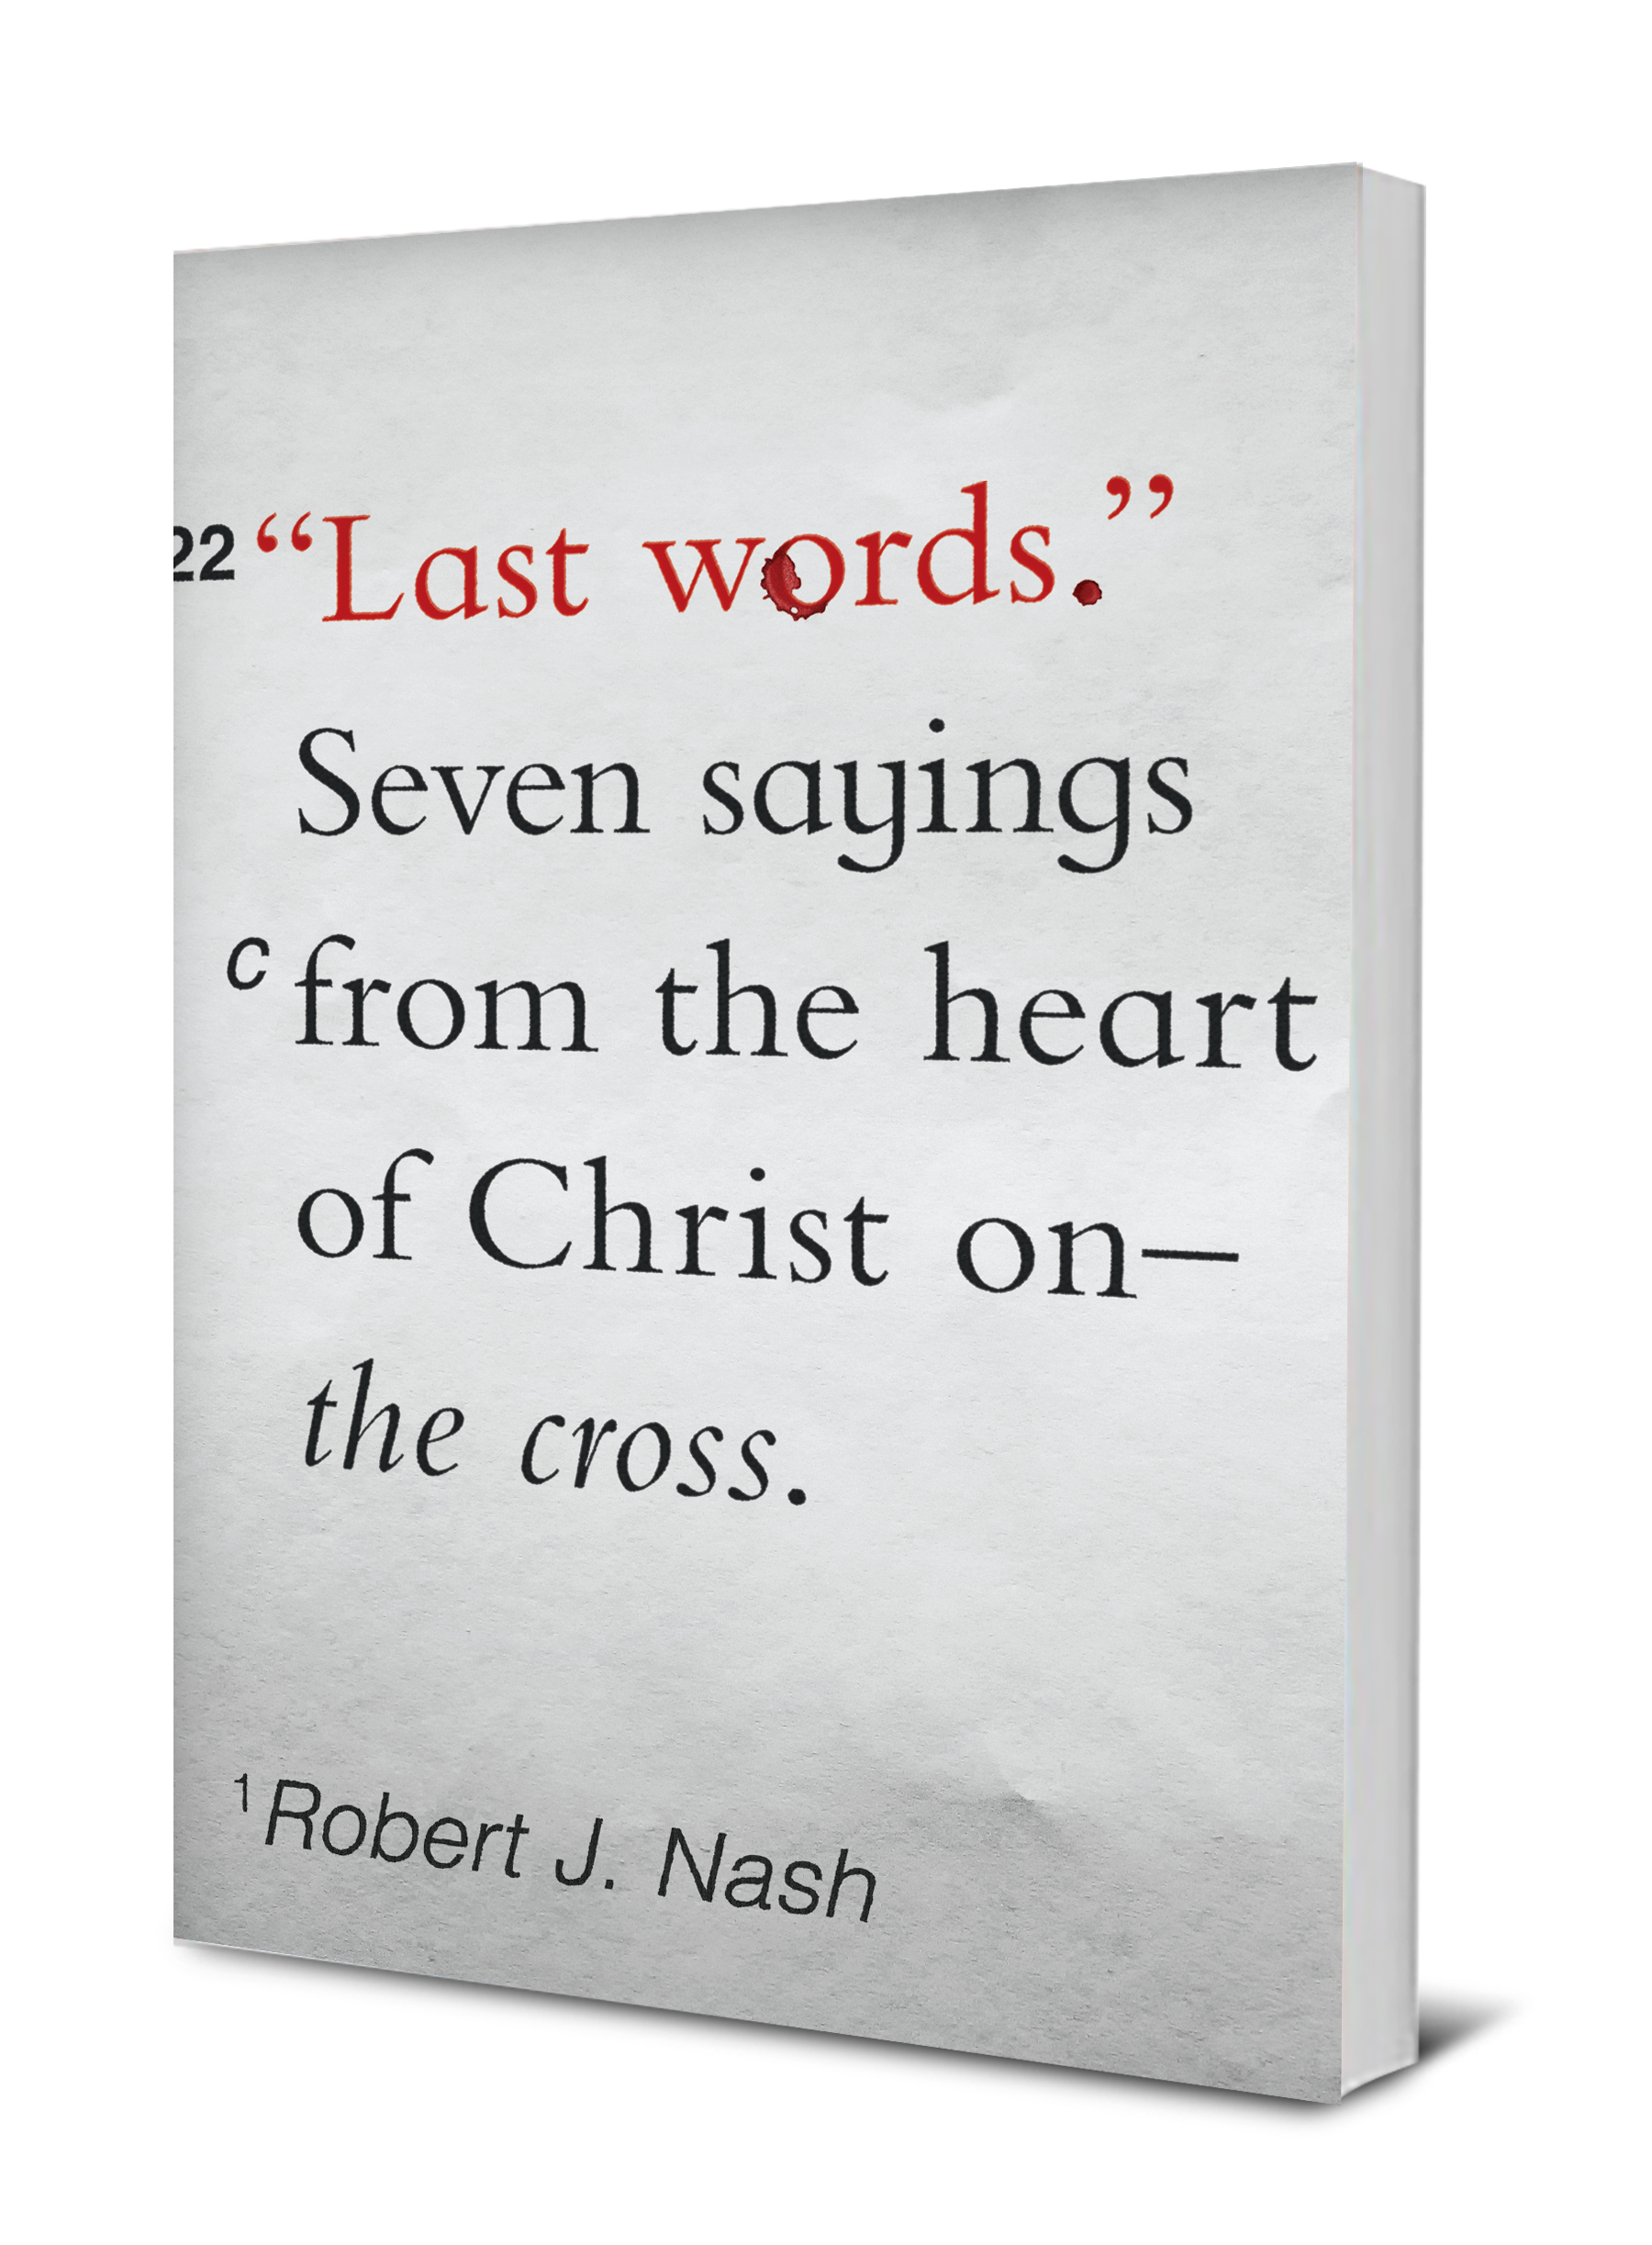 Last Words, 7 Sayings from the Heart of Christ on the Cross